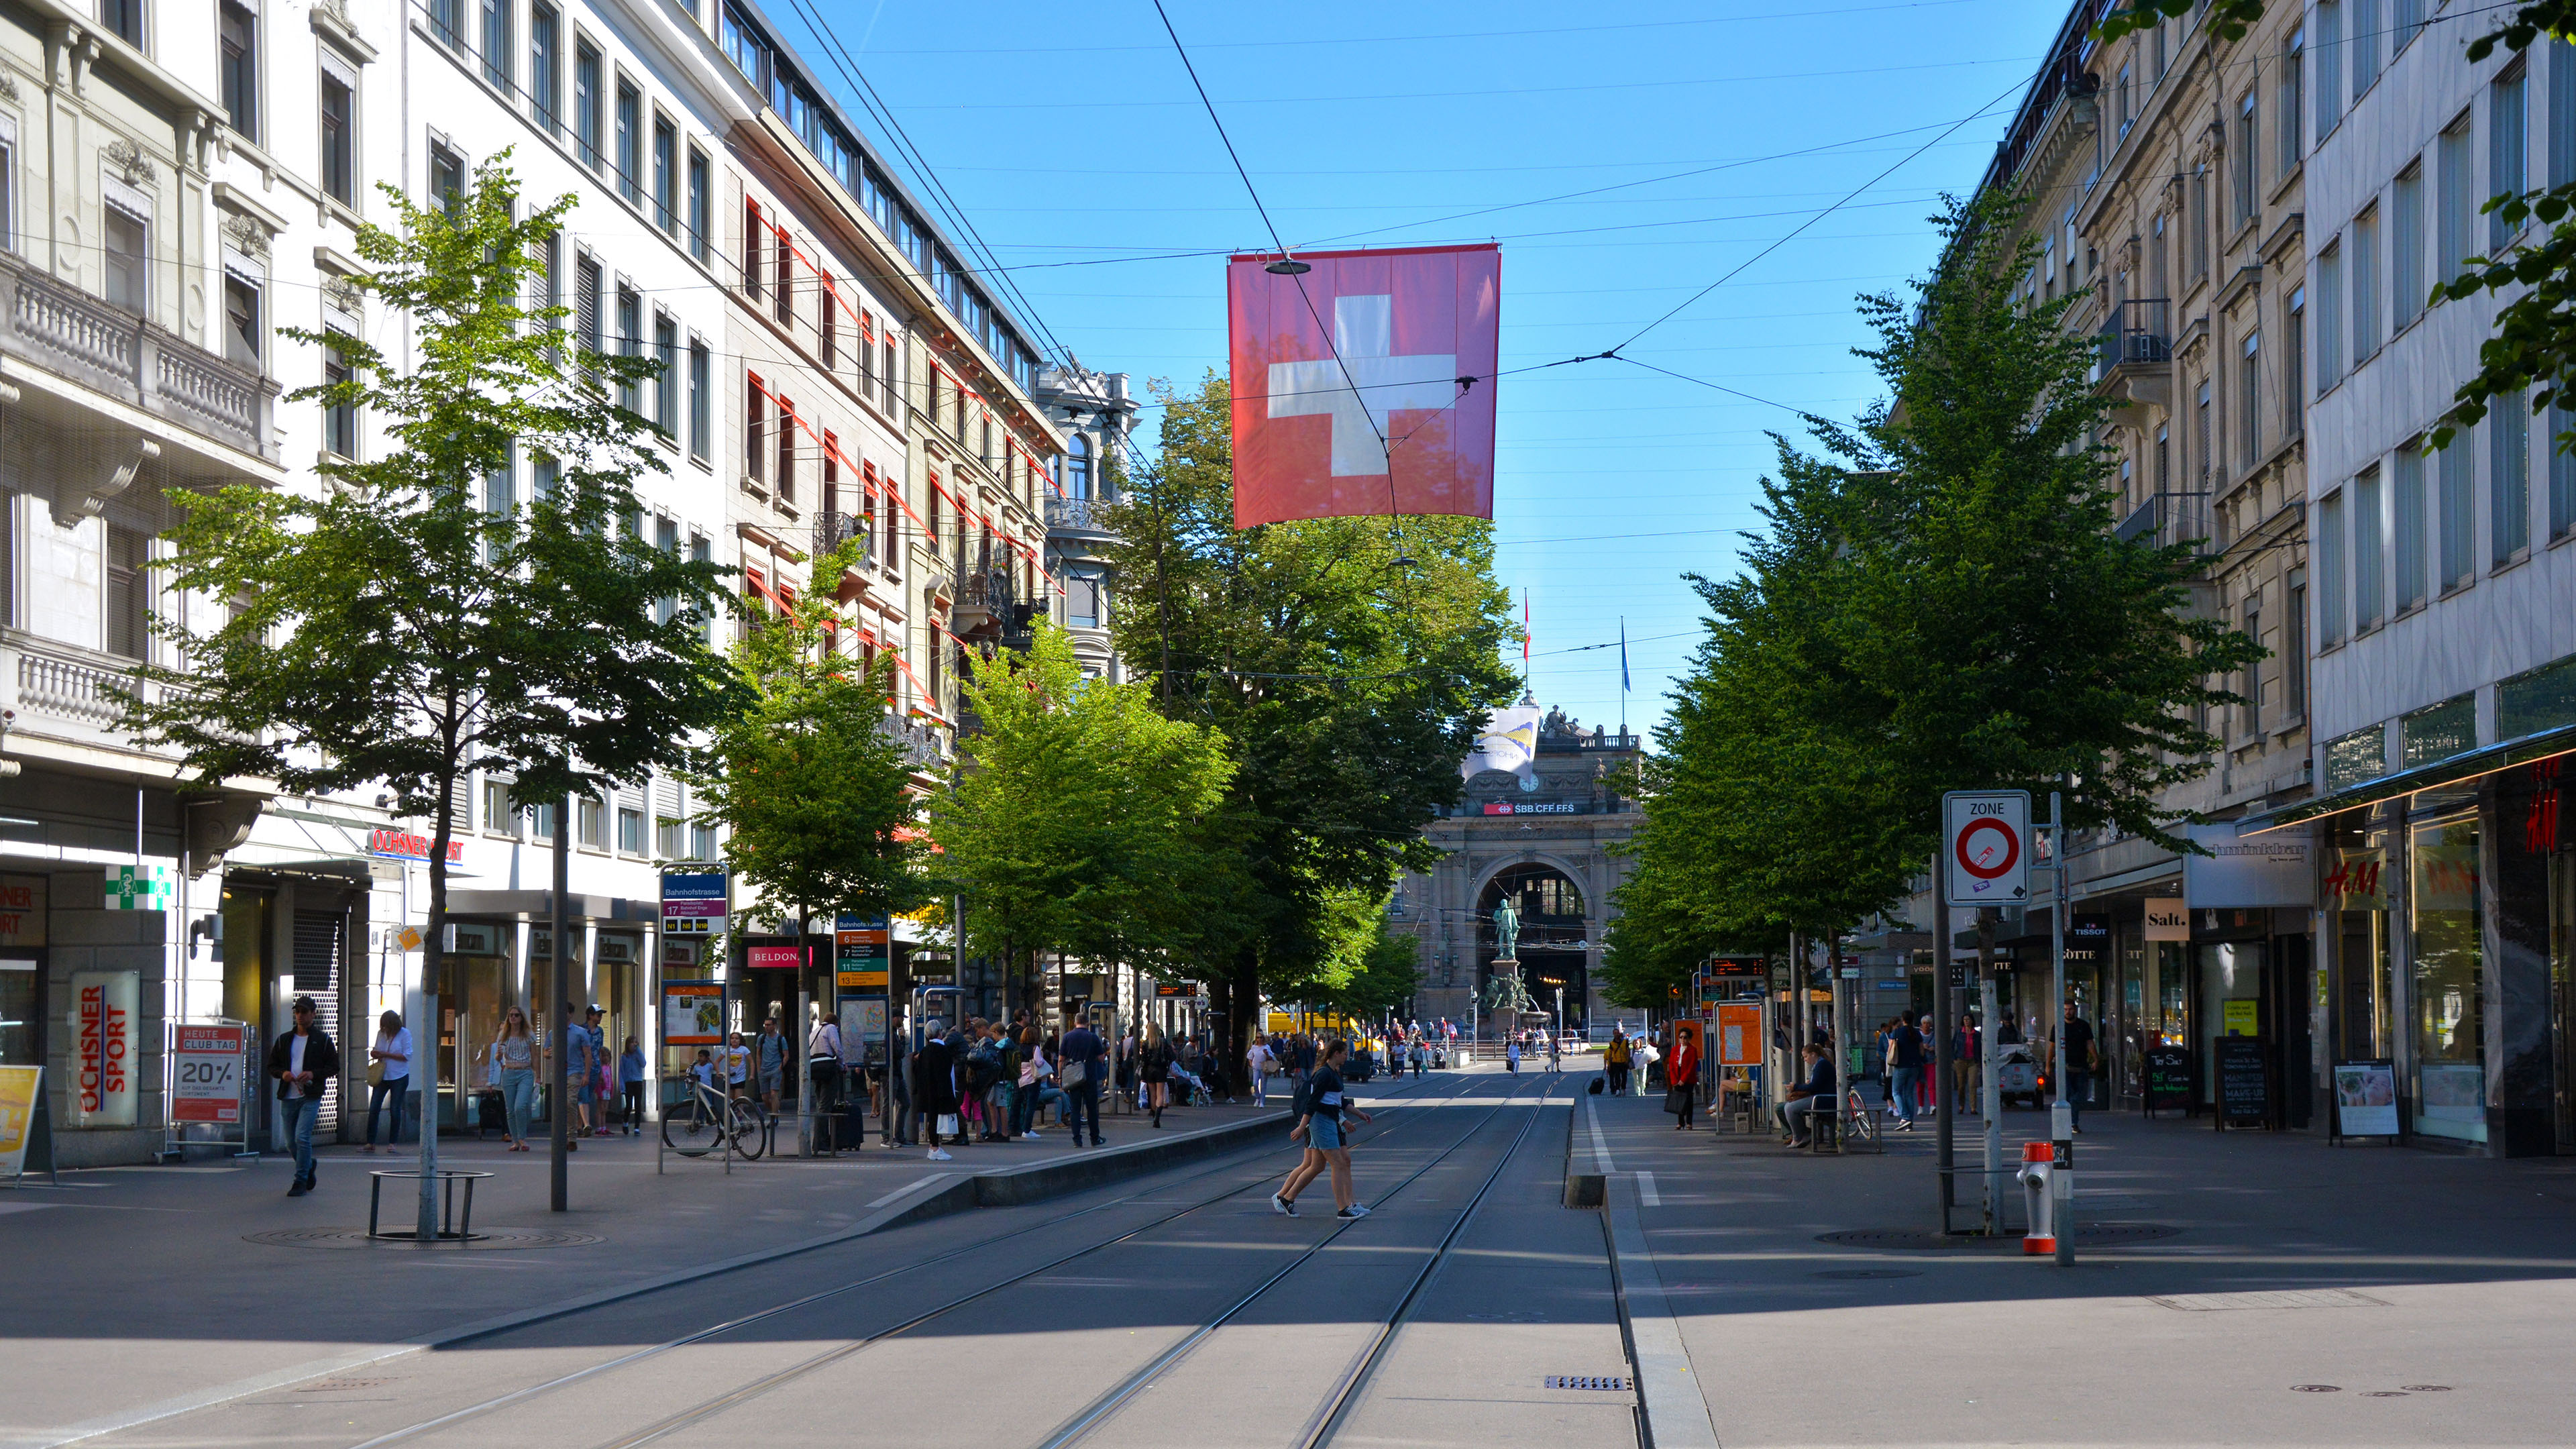 Bahnhofstrasse with Swiss flag